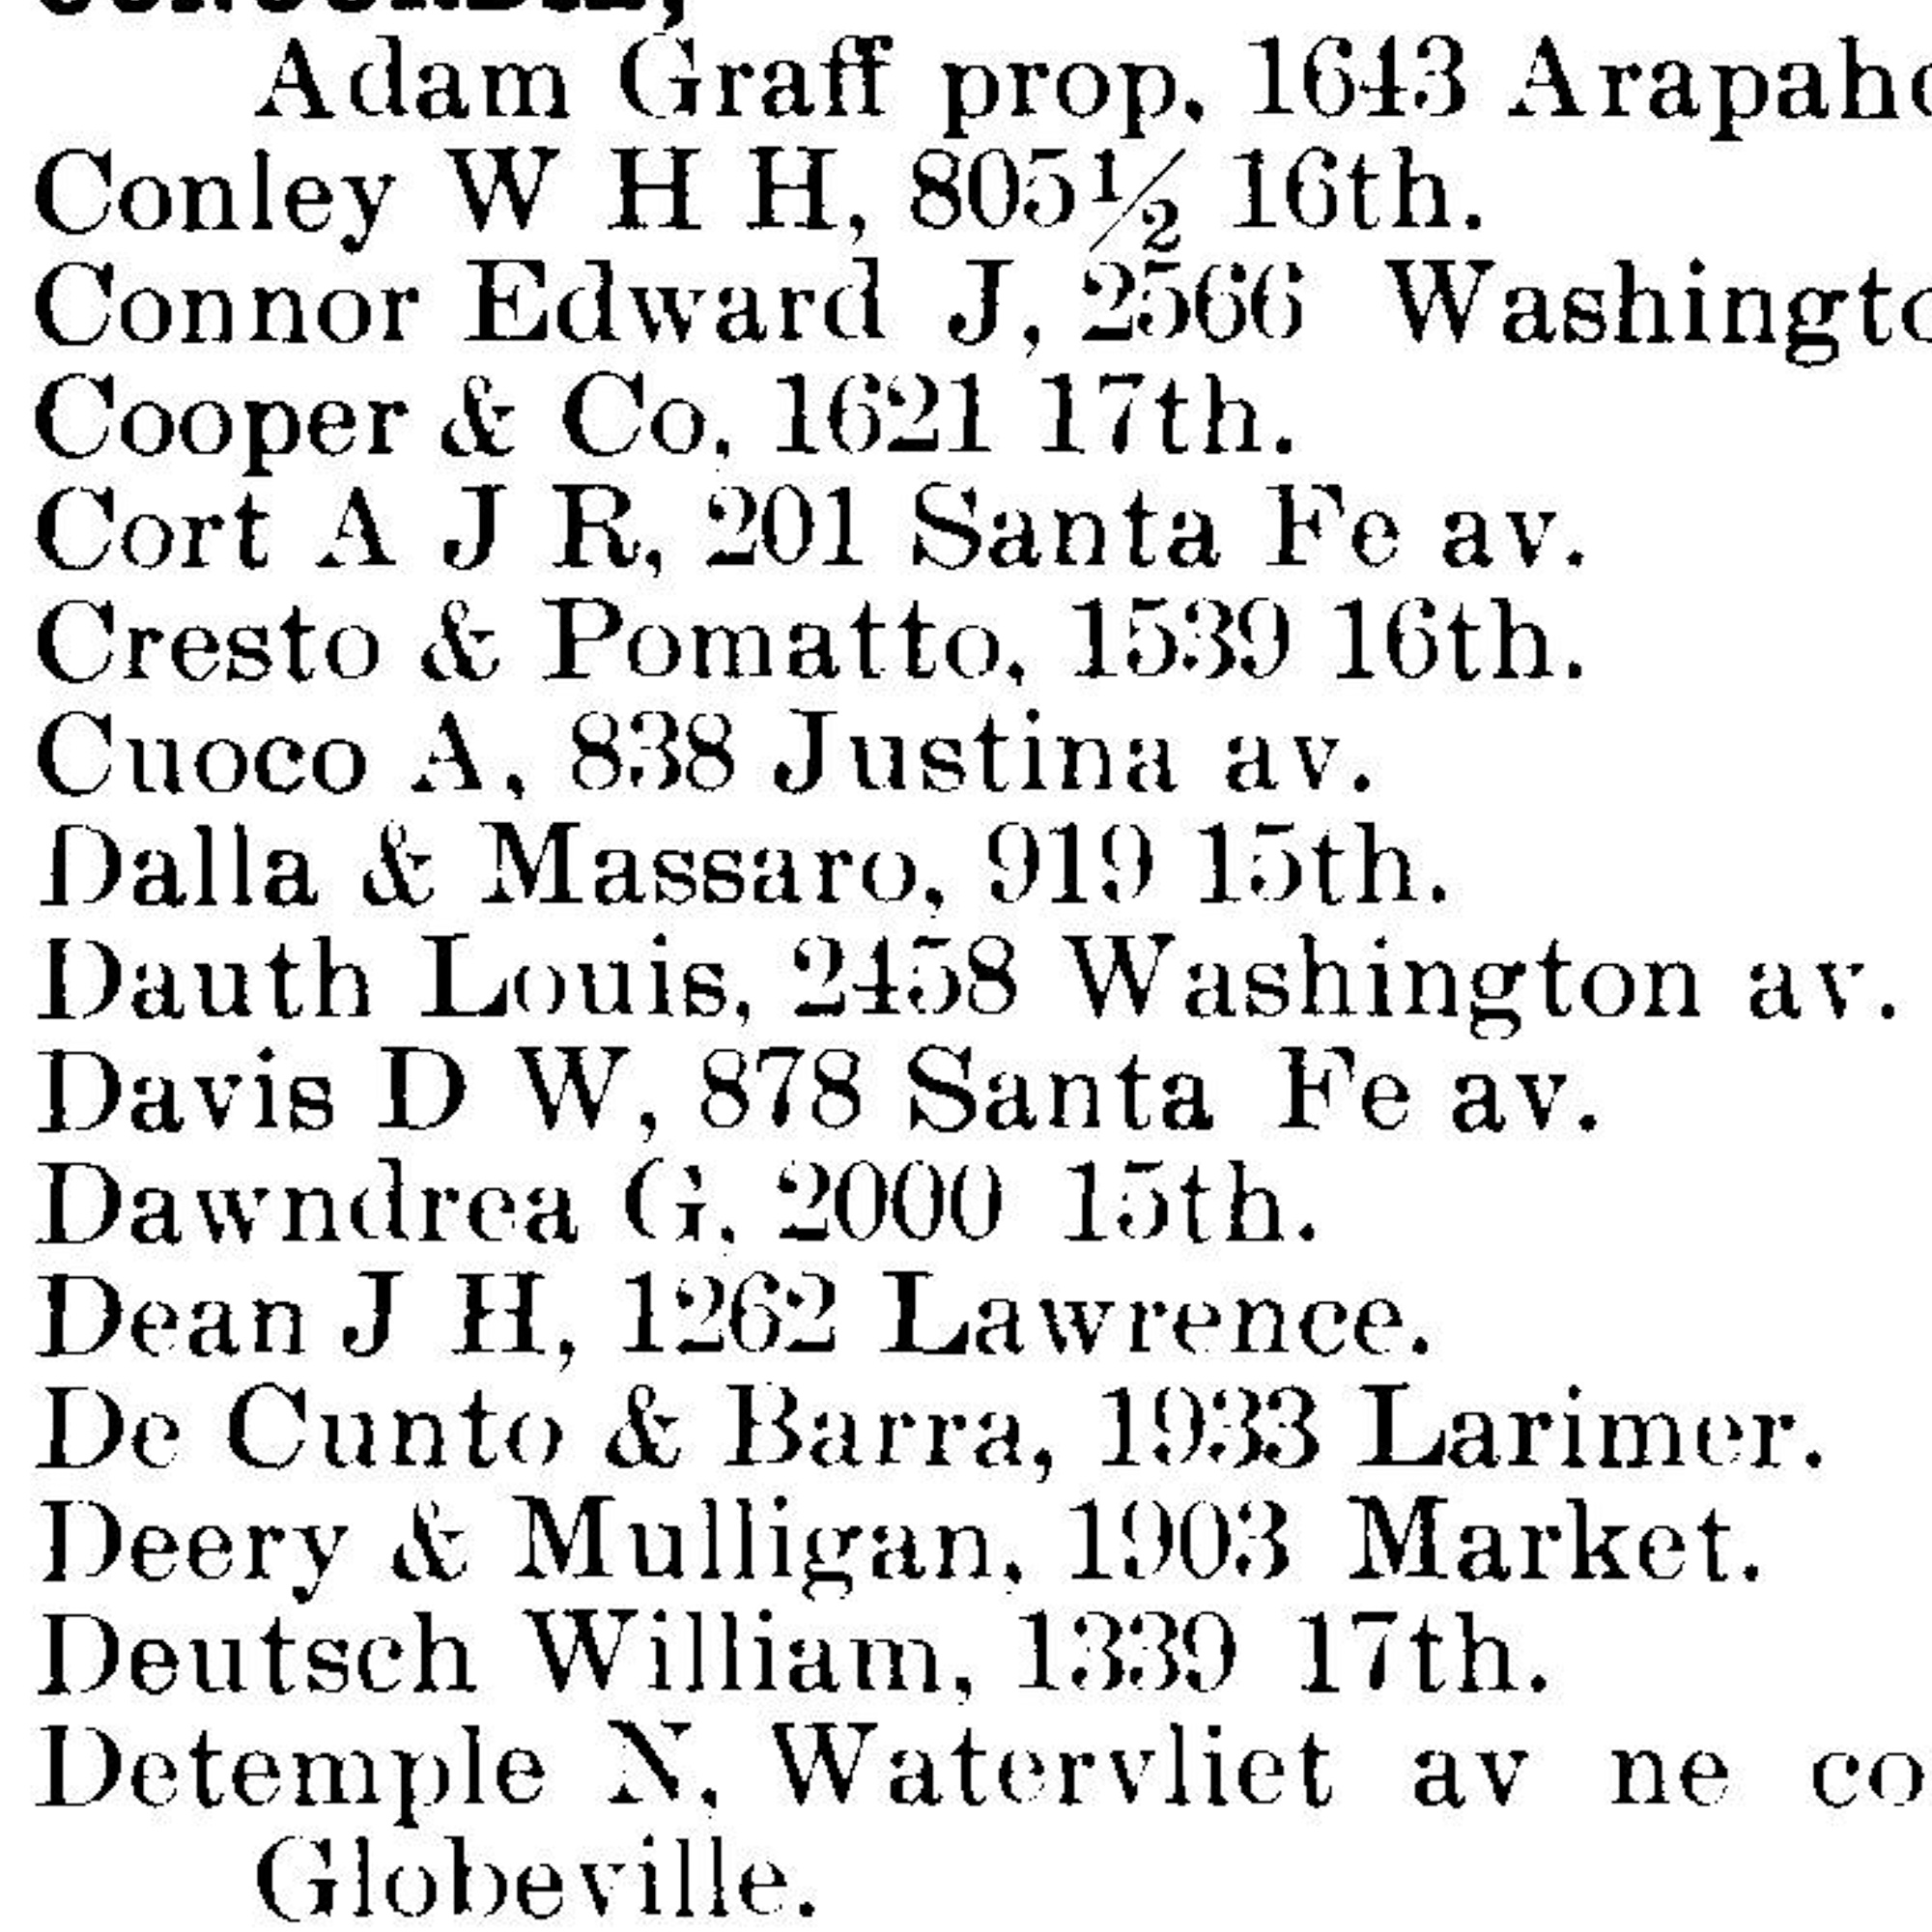 Dauth Family Archive - 1894 - Denver Directory - Entry For Louis Dauth